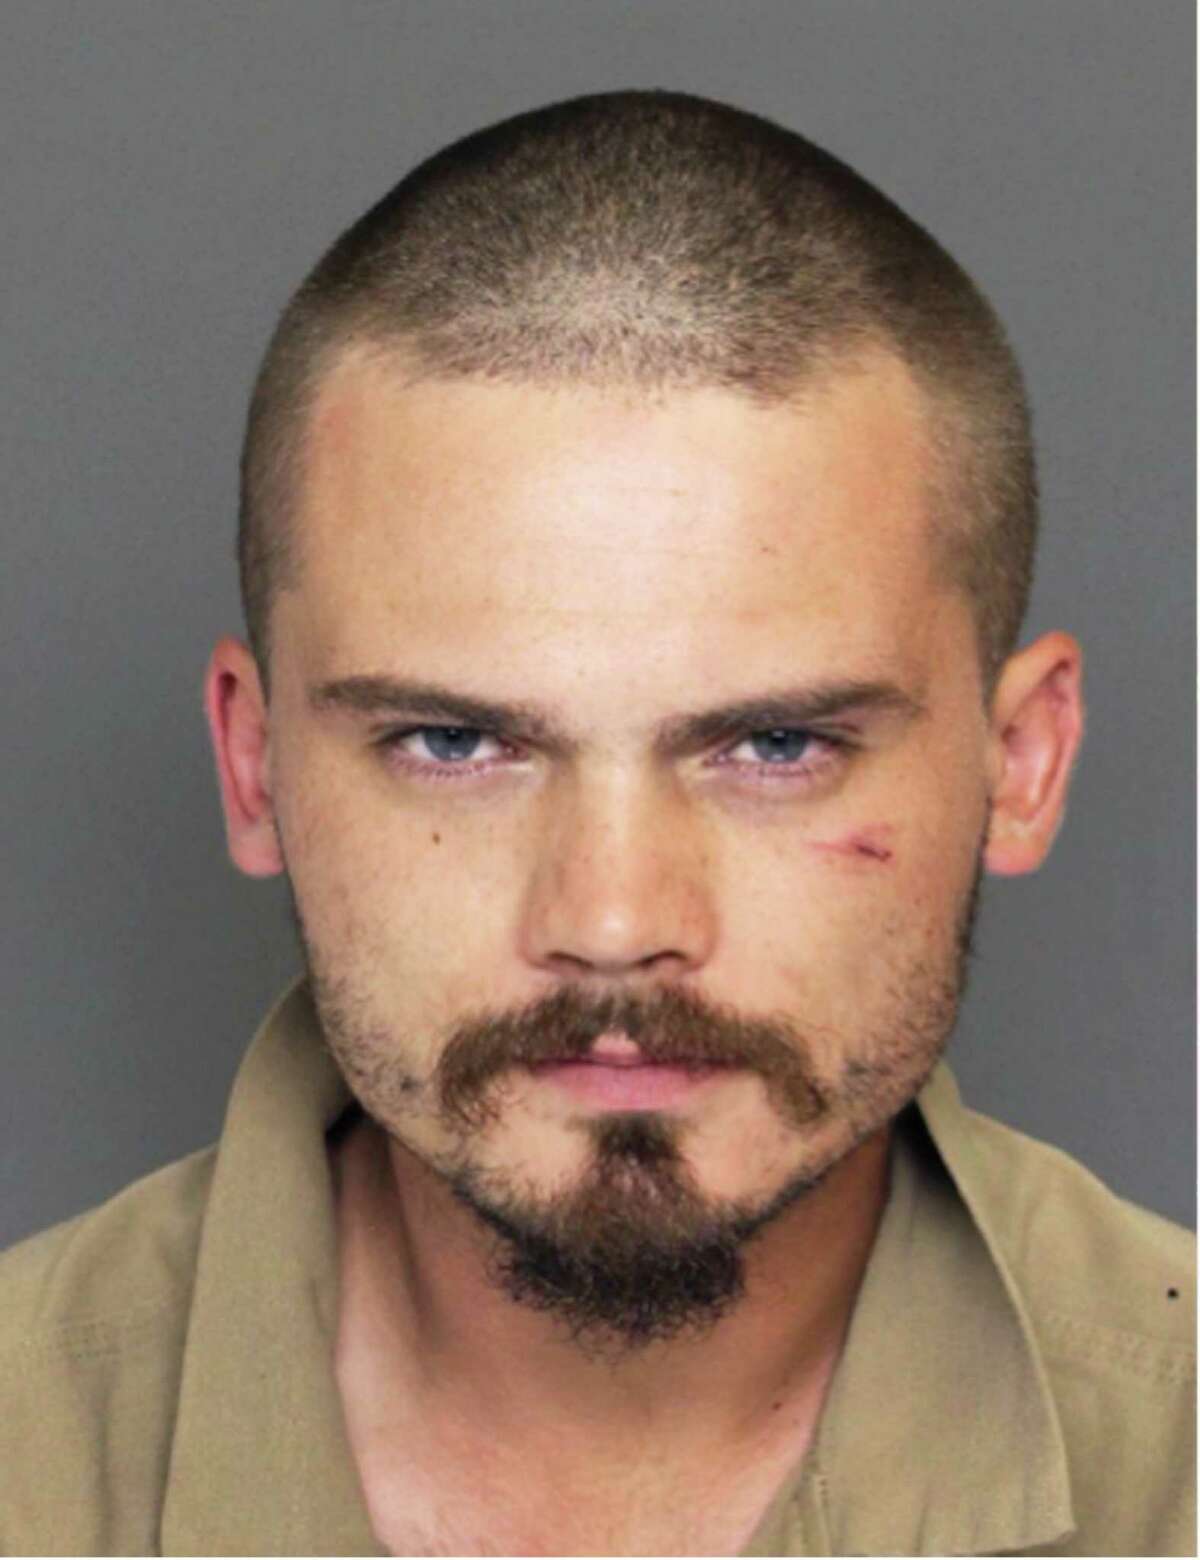 This Wednesday, June 17, 2015 law enforcement booking photo provided by the Colleton County, S.C., Sheriff's Office shows former "Star Wars" actor Jake Lloyd, who was booked as Jake Broadbent, after he allegedly lead deputies on a chase hitting speeds over 100 mph Wednesday at the Colleton County Detention Center, in Walterboro, S.C. Colleton County, South Carolina, Sheriff's Sgt. Kyle Strickland said Sunday June 21, 2015, that deputies arrested a 26-year-old man they confirmed through a former talent agent was Jake Lloyd. Strickland said the man gave his name as Jake Broadbent. He played young Anakin Skywalker in the 1999 movie "Star Wars: Episode I - The Phantom Menace."